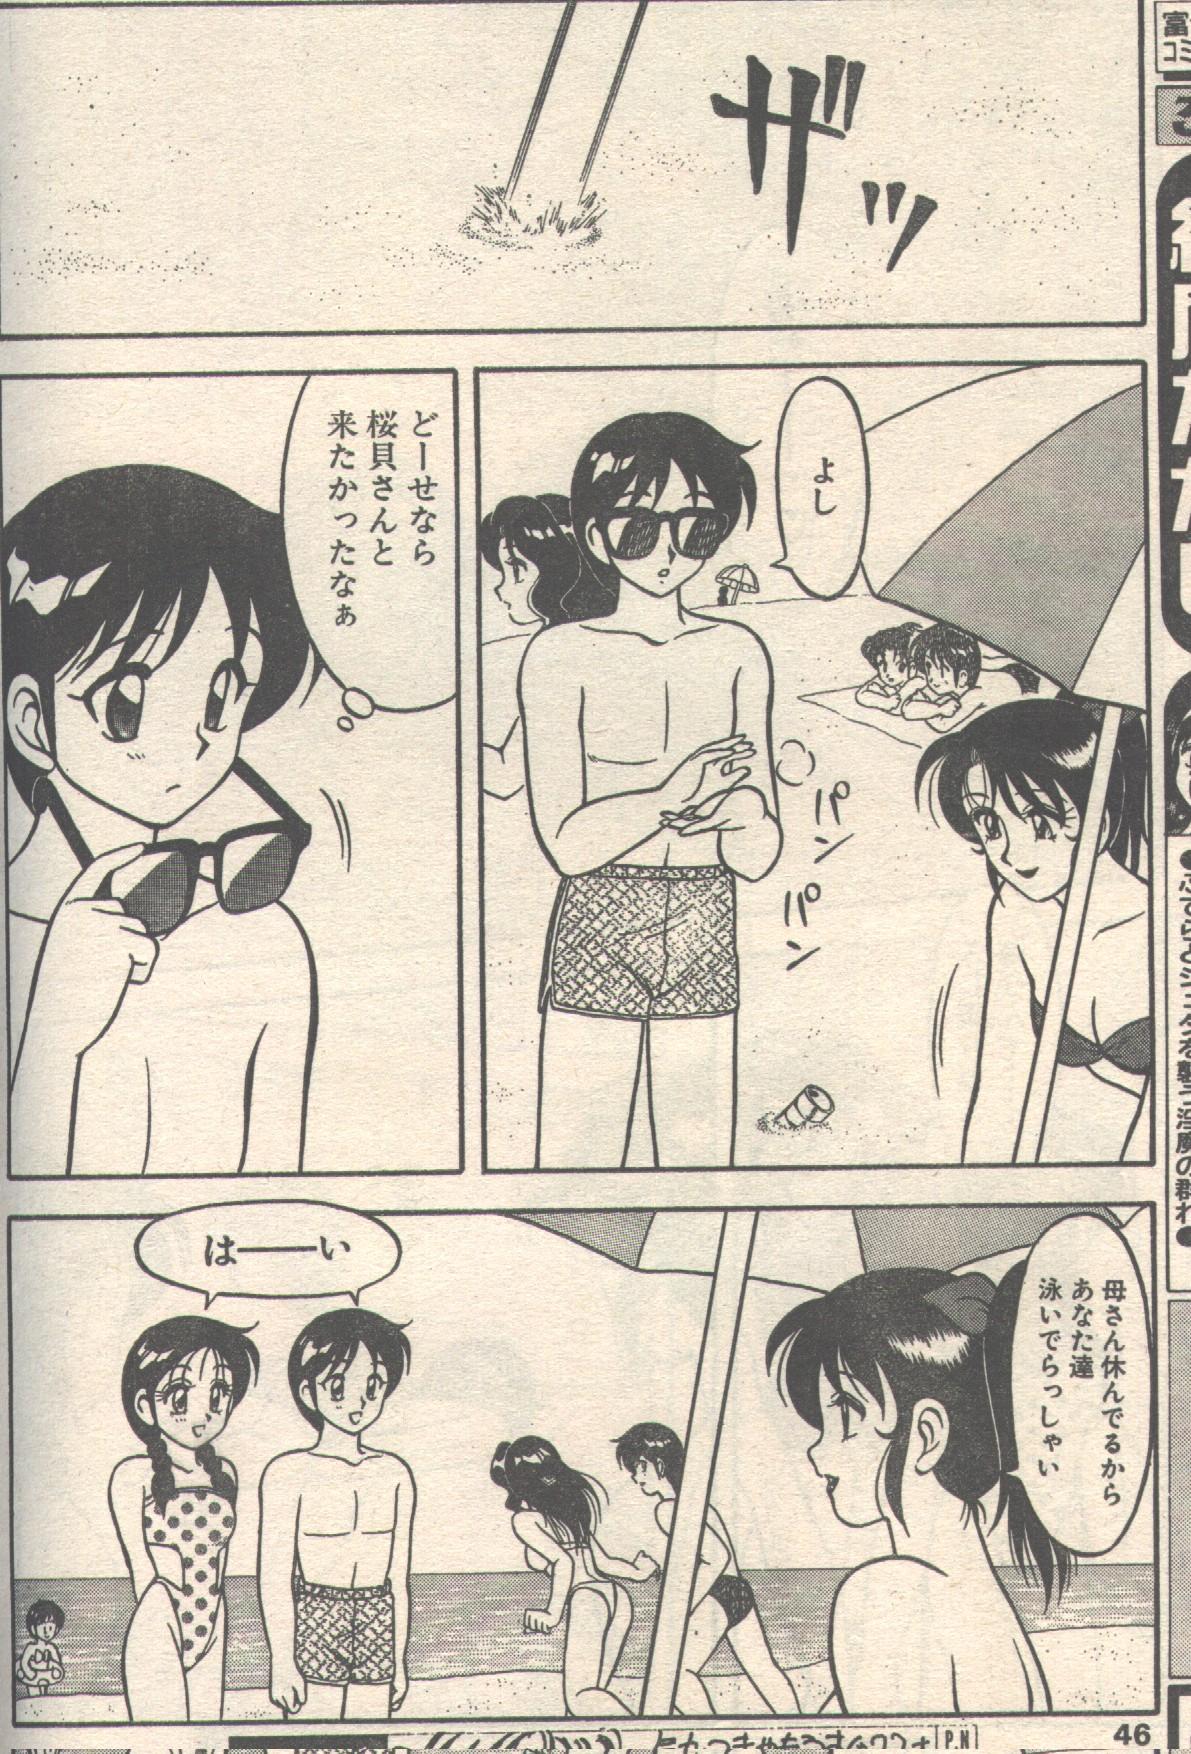 Candy Time 1992-08 [Incomplete] キャンディータイム 1992年08月号 [不完全]